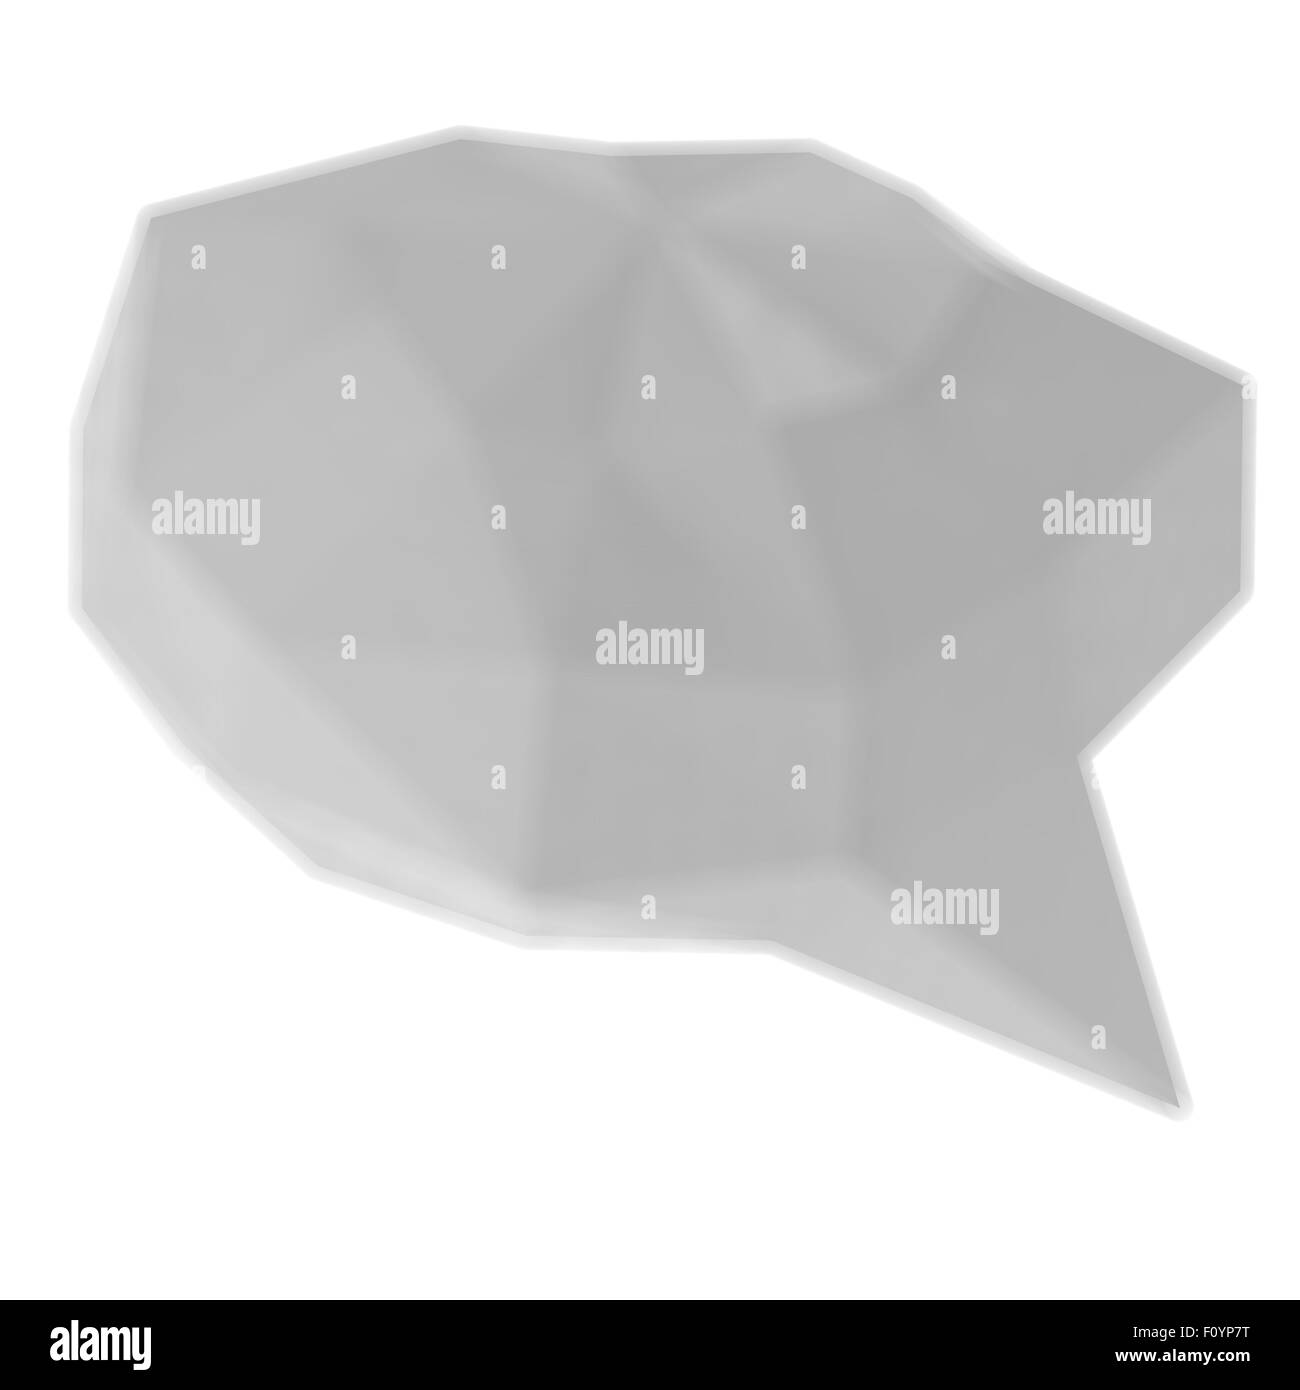 blurred low poly geometric speech bubble on white background Stock Photo